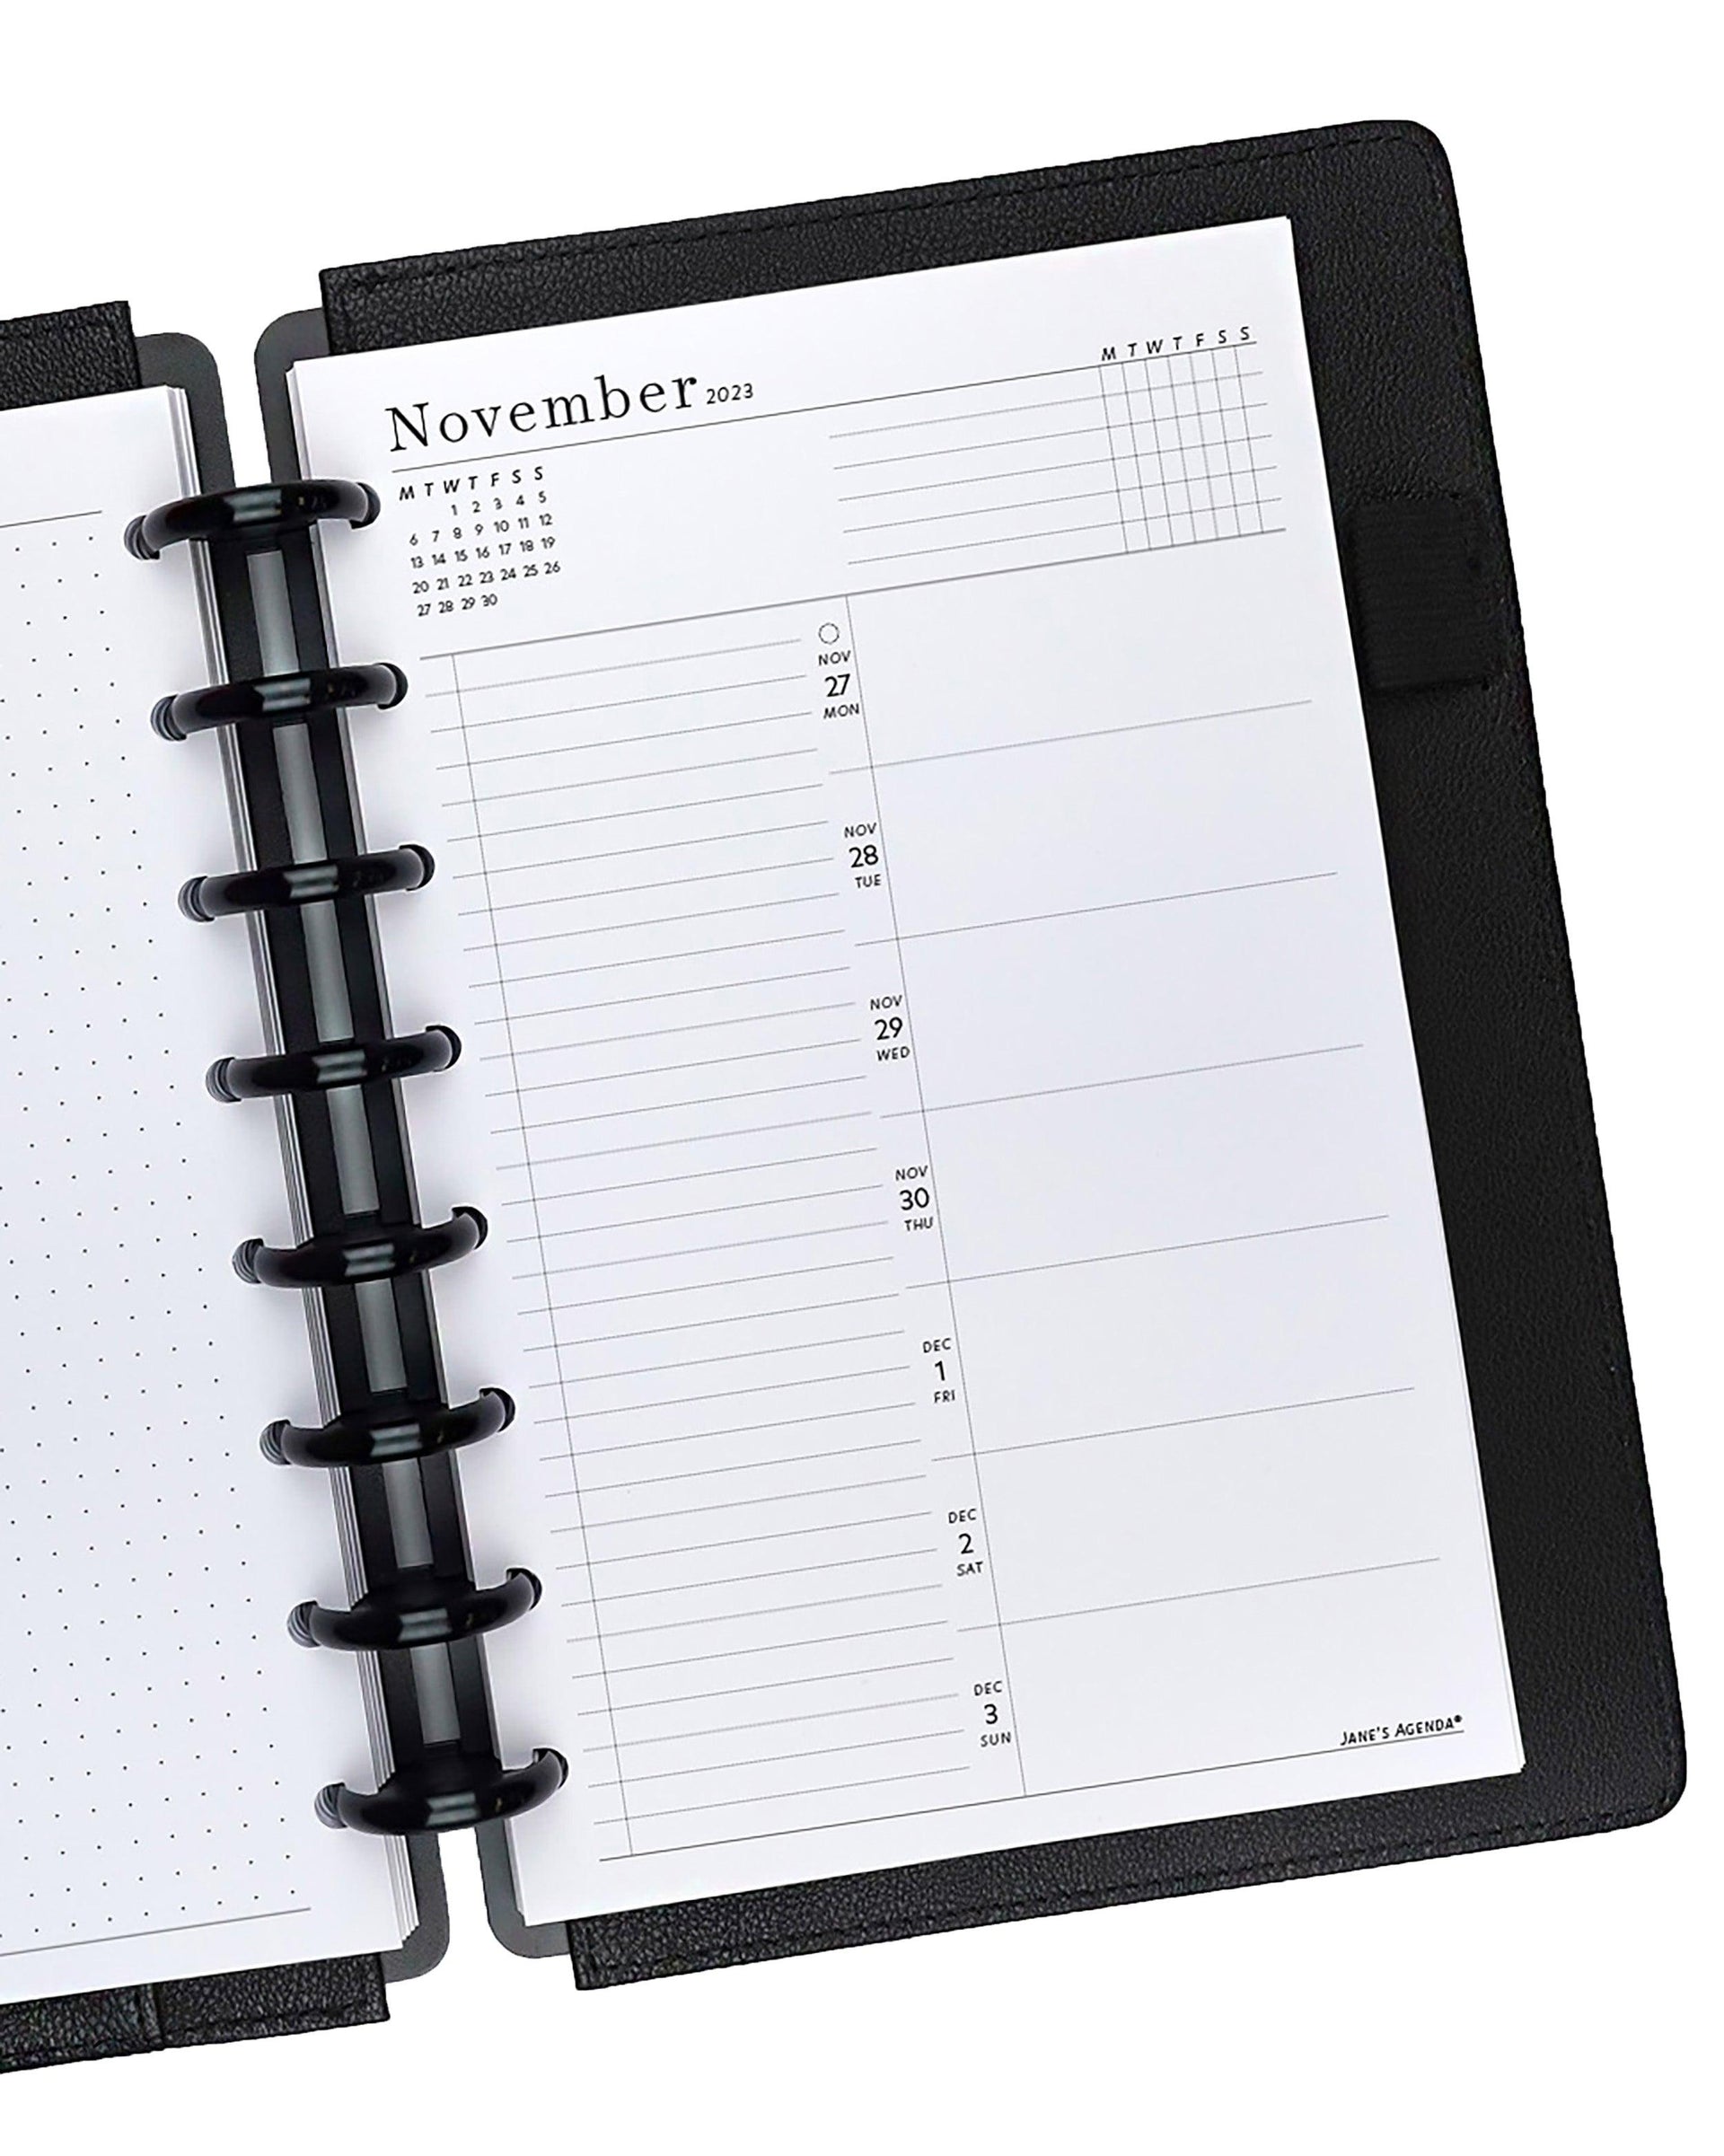 Weekly calendar pages and planner inserts for discbound and six ring planners by Janes Agenda.